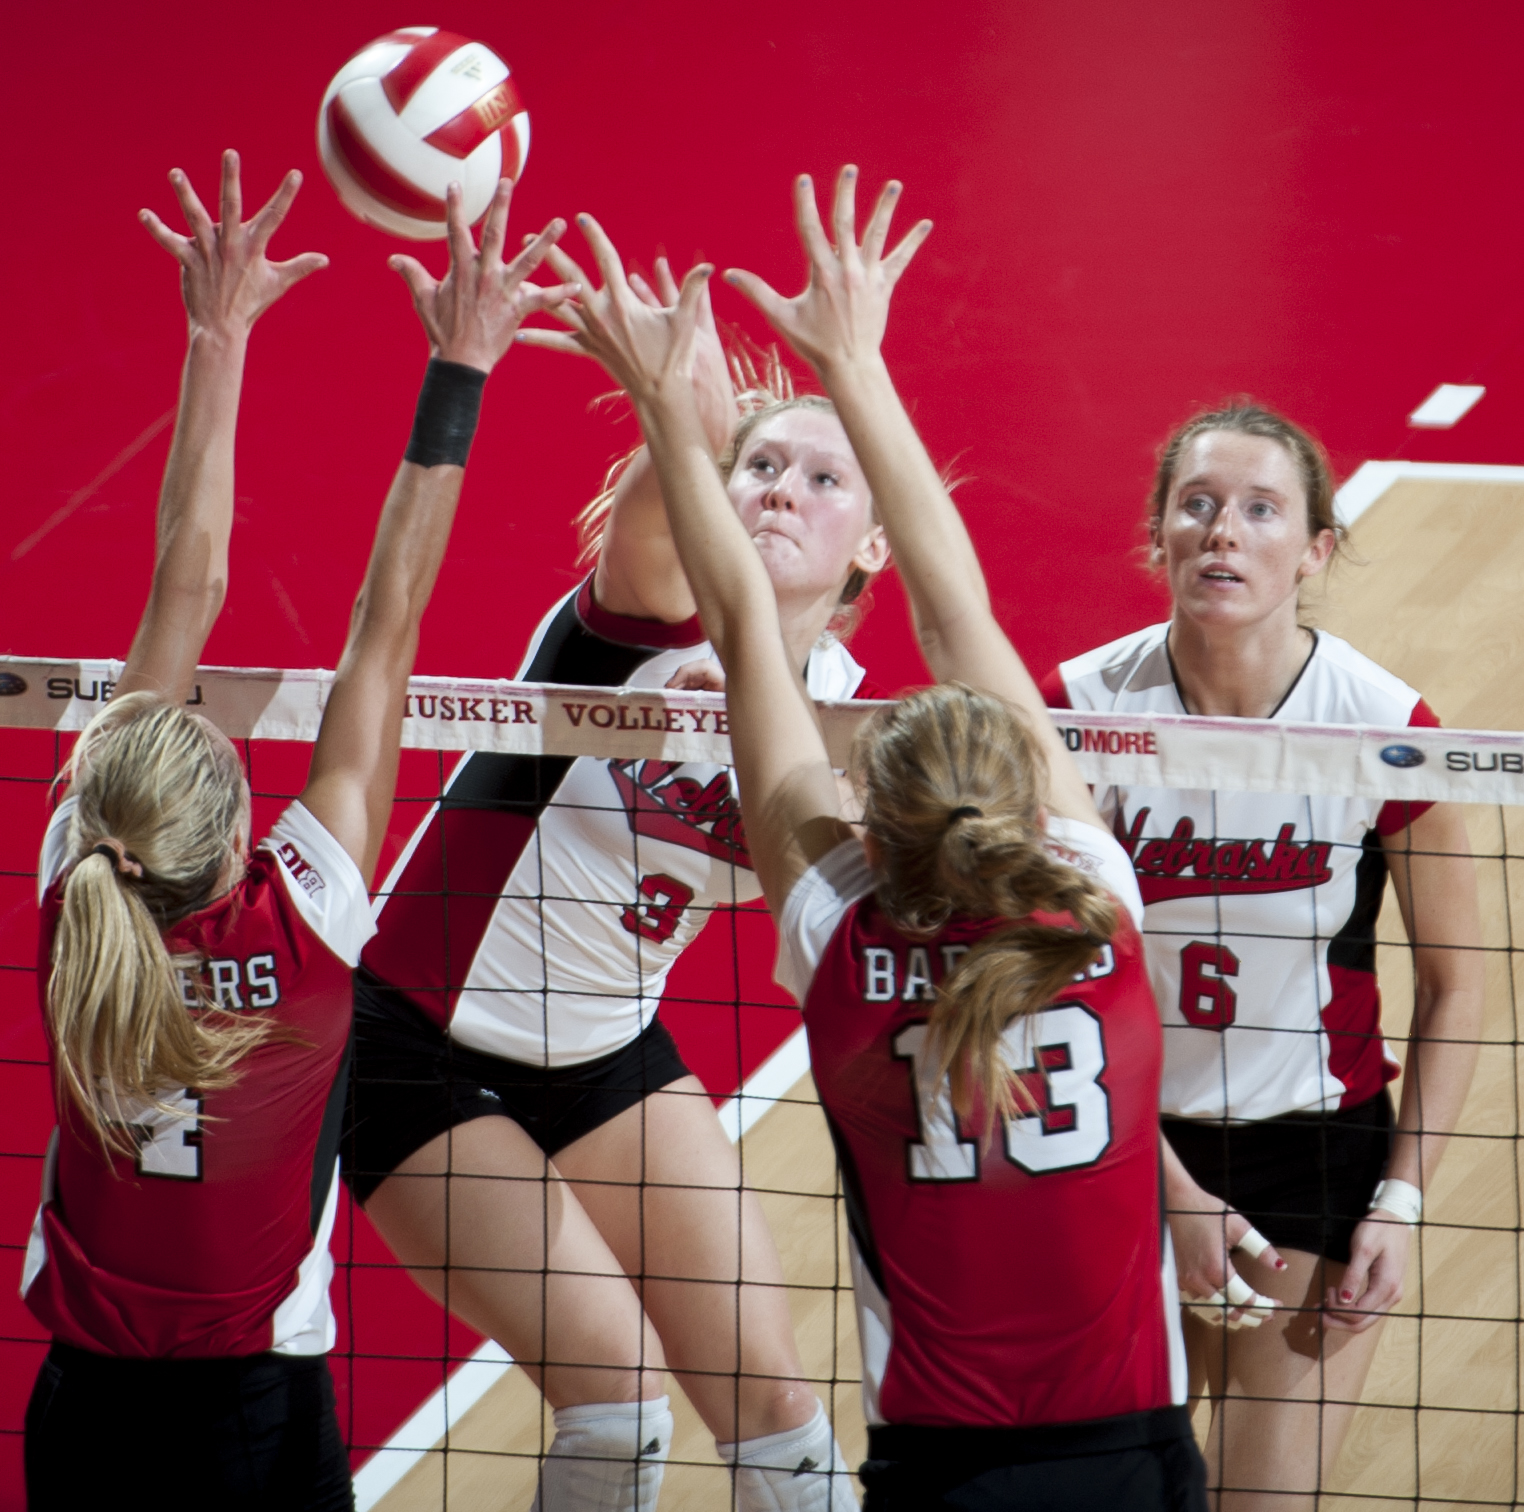  Nebraska's Kelly Hunter (3) spikes the ball against Wisconsin's Kelli Bates (4) and Haleigh Nelson (13) in the fourth set of action at Devaney Sports Center in Lincoln Saturday Oct. 24, 2015. The Huskers would win the first set of the match but then